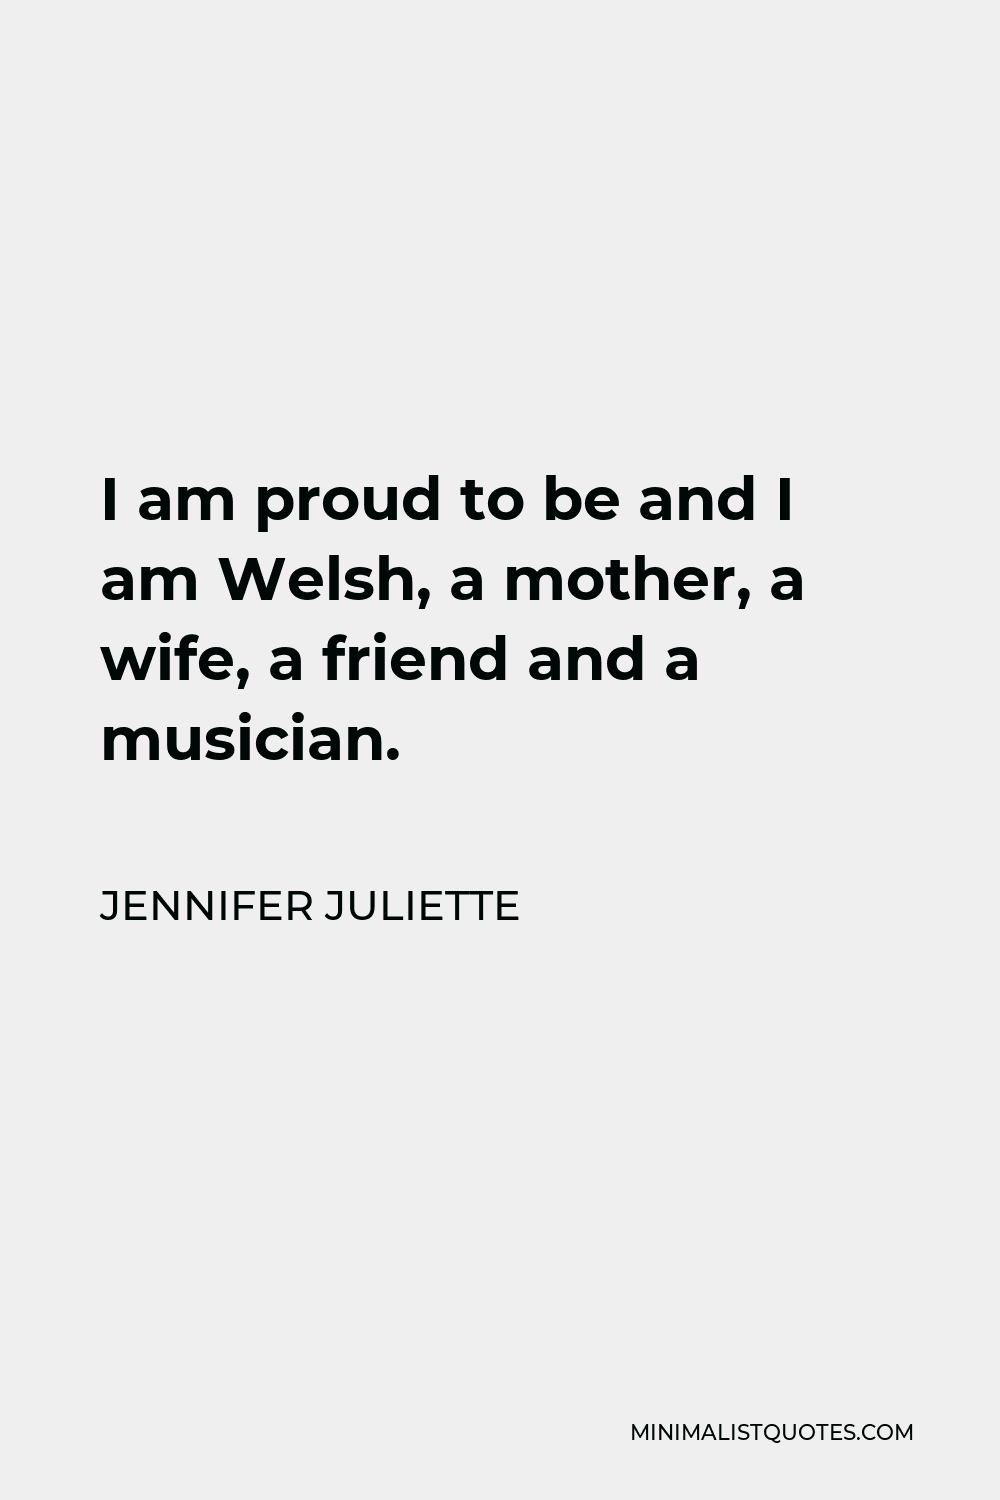 Jennifer Juliette Quote - I am proud to be and I am Welsh, a mother, a wife, a friend and a musician.